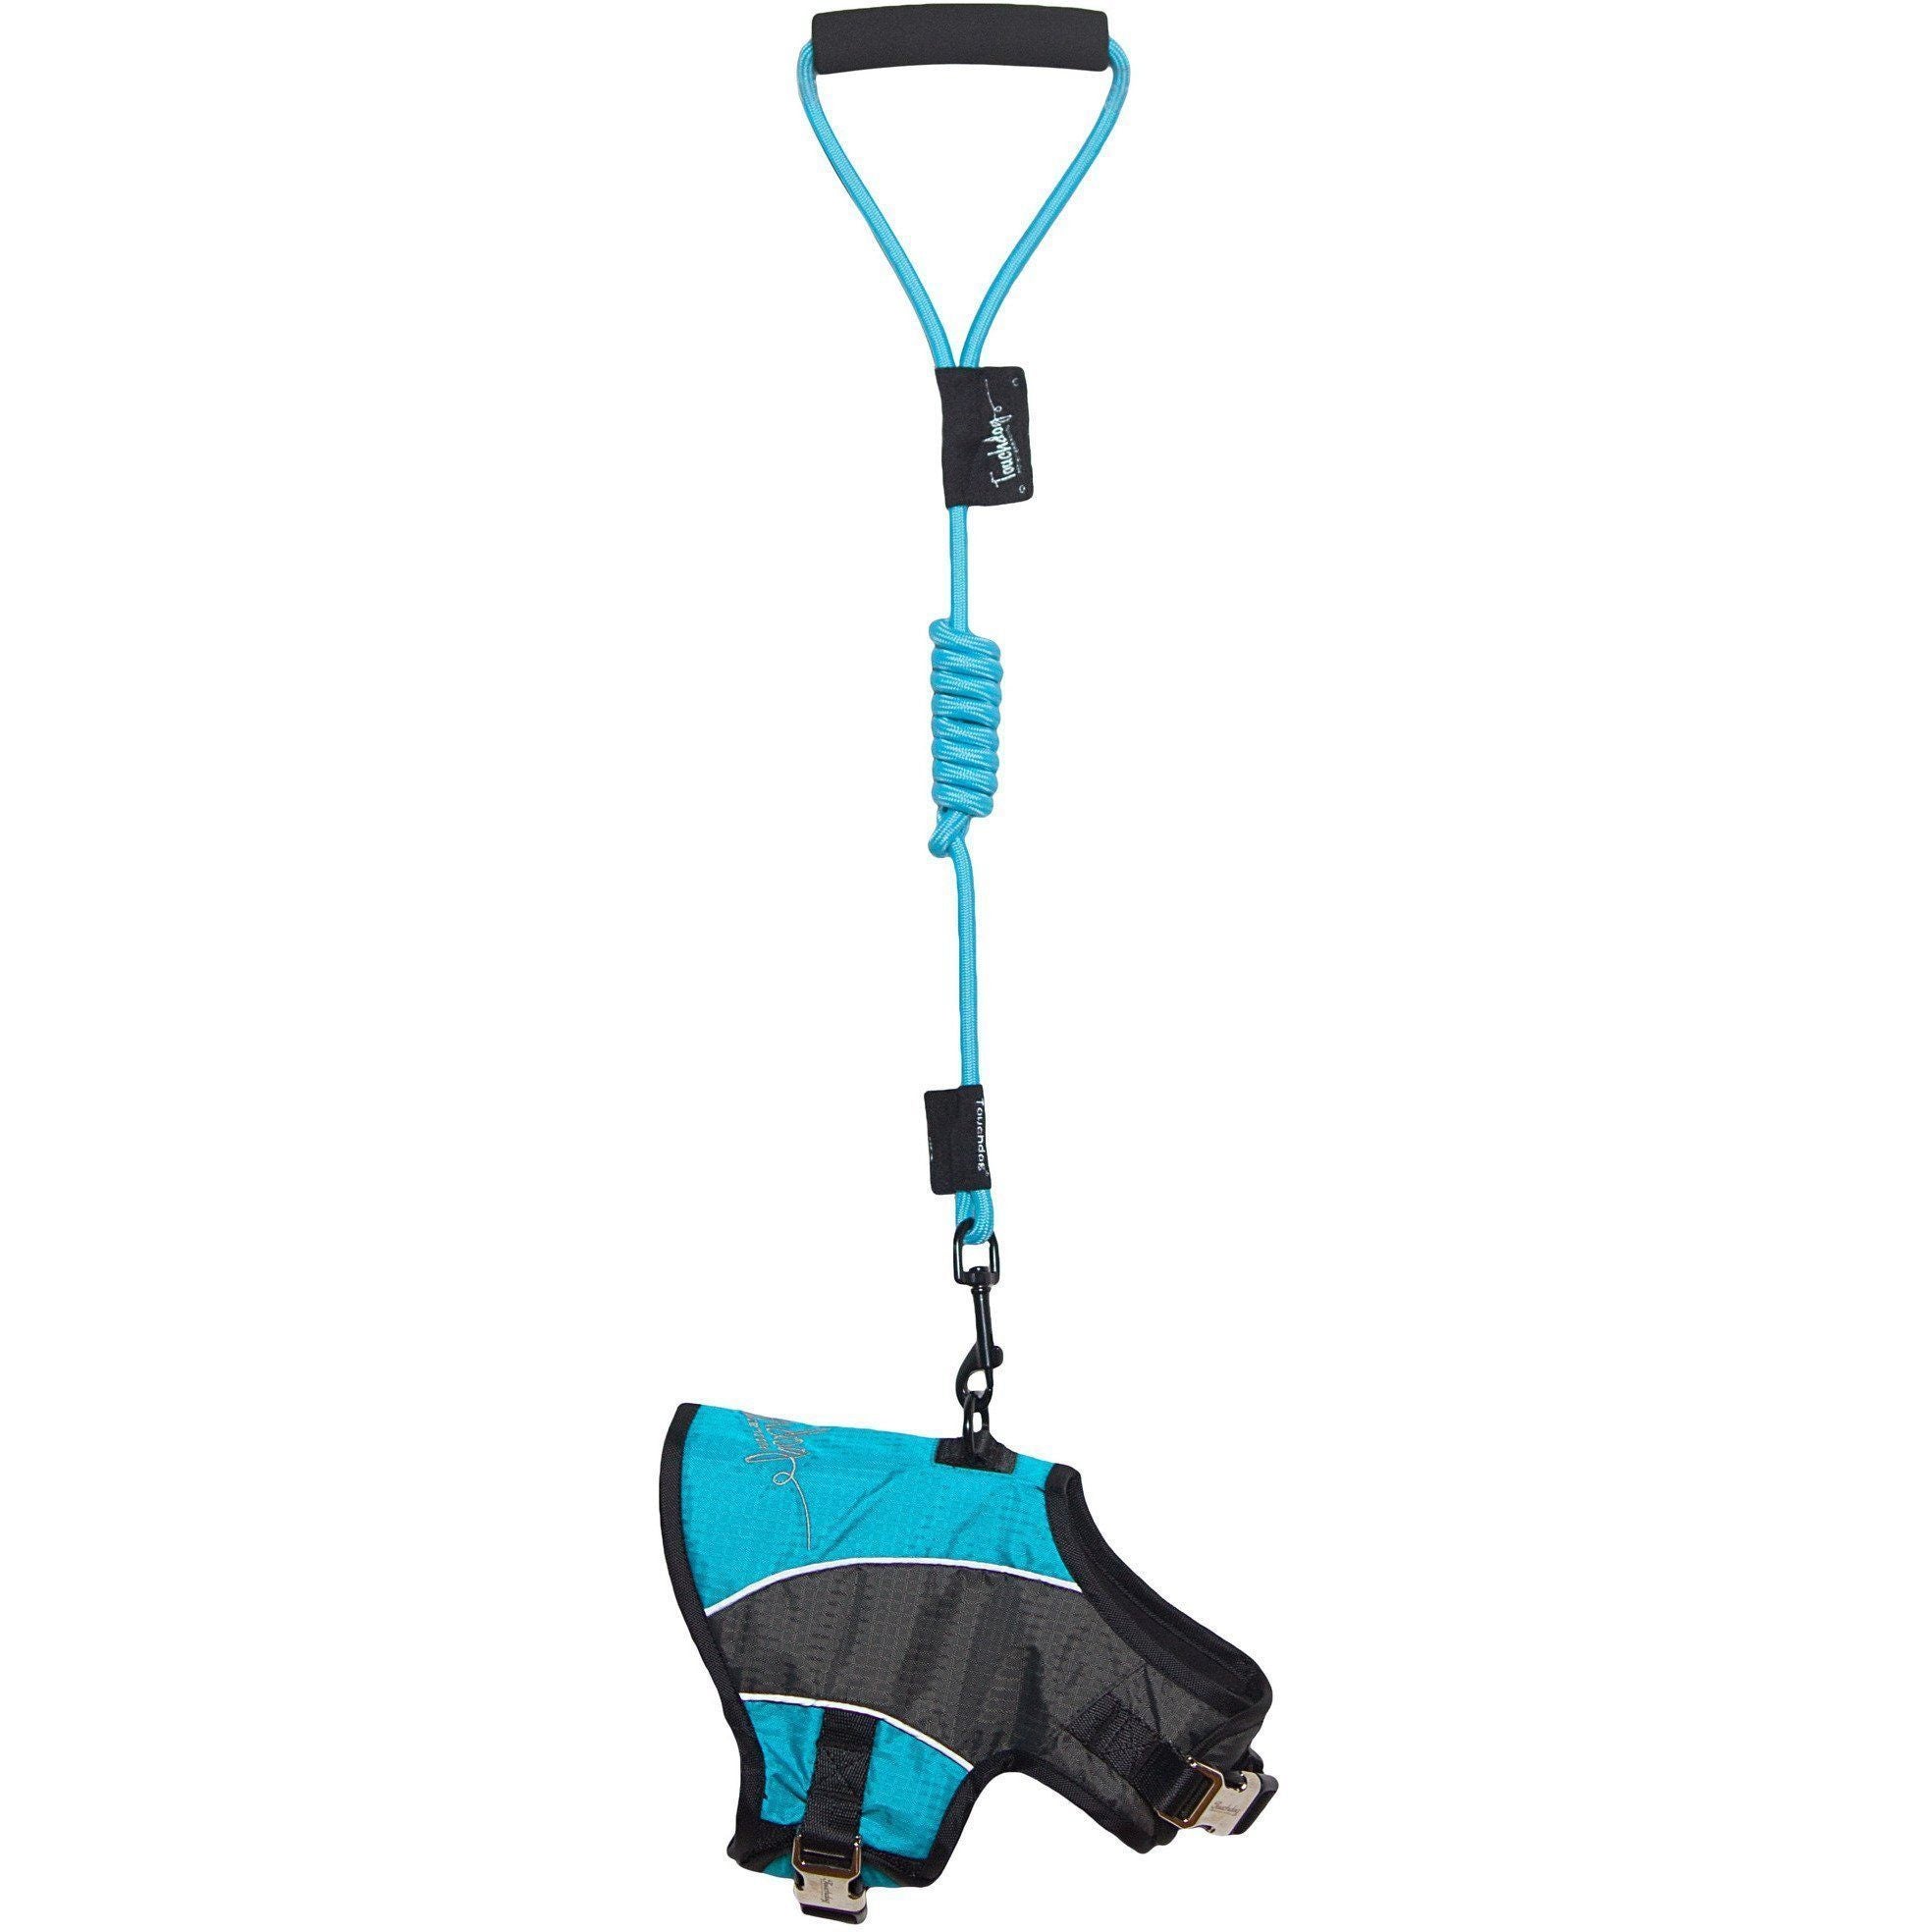 Touchdog ® 'Reflective-Max' 2-in-1 Performance Dog Harness and Leash X-Small Turquoise Blue, Charcoal Grey